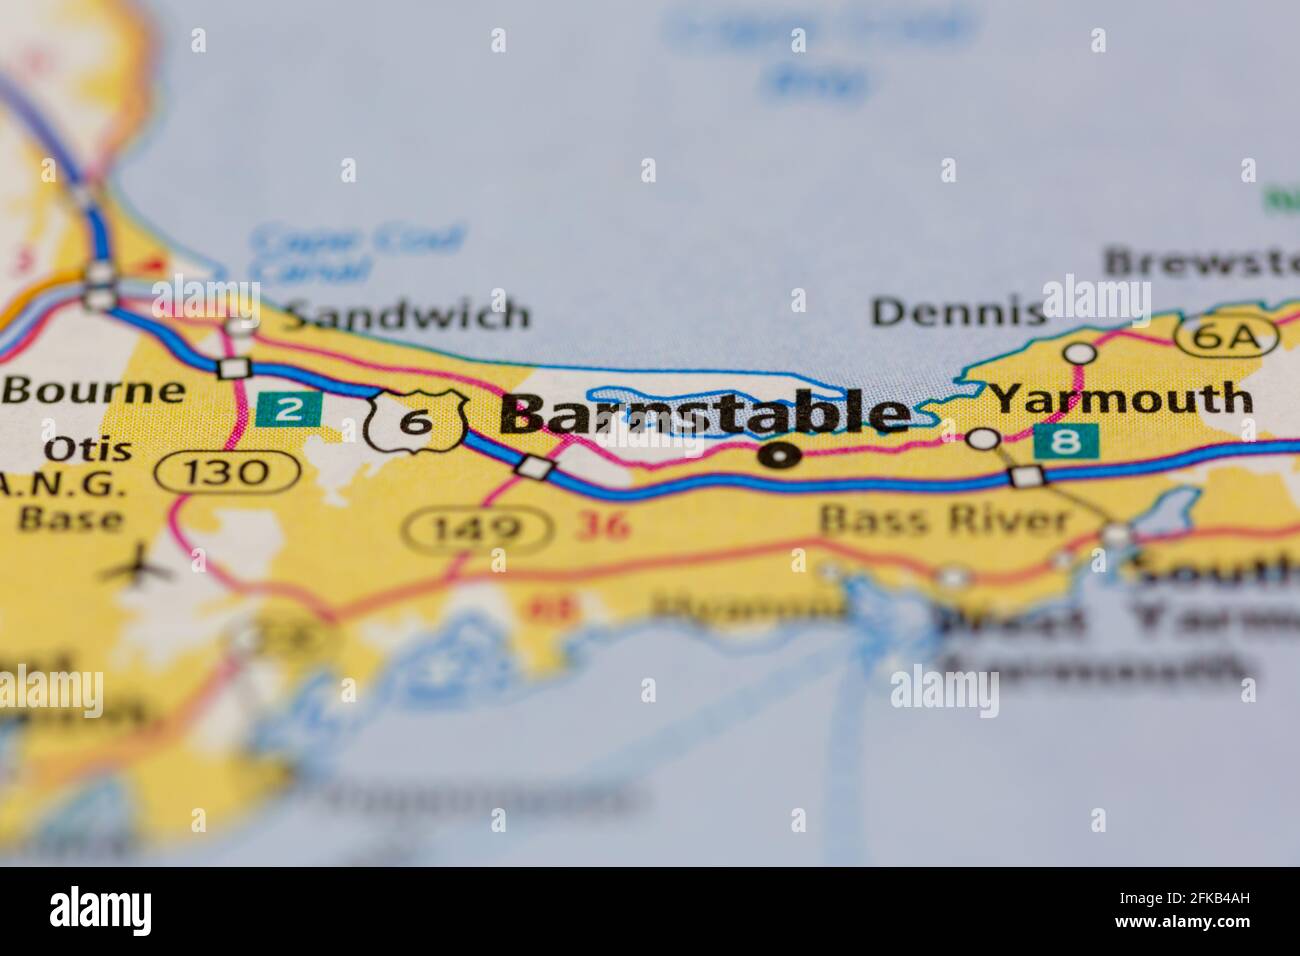 Barnstable Massachusetts USA Shown on a Geography map or road map Stock Photo